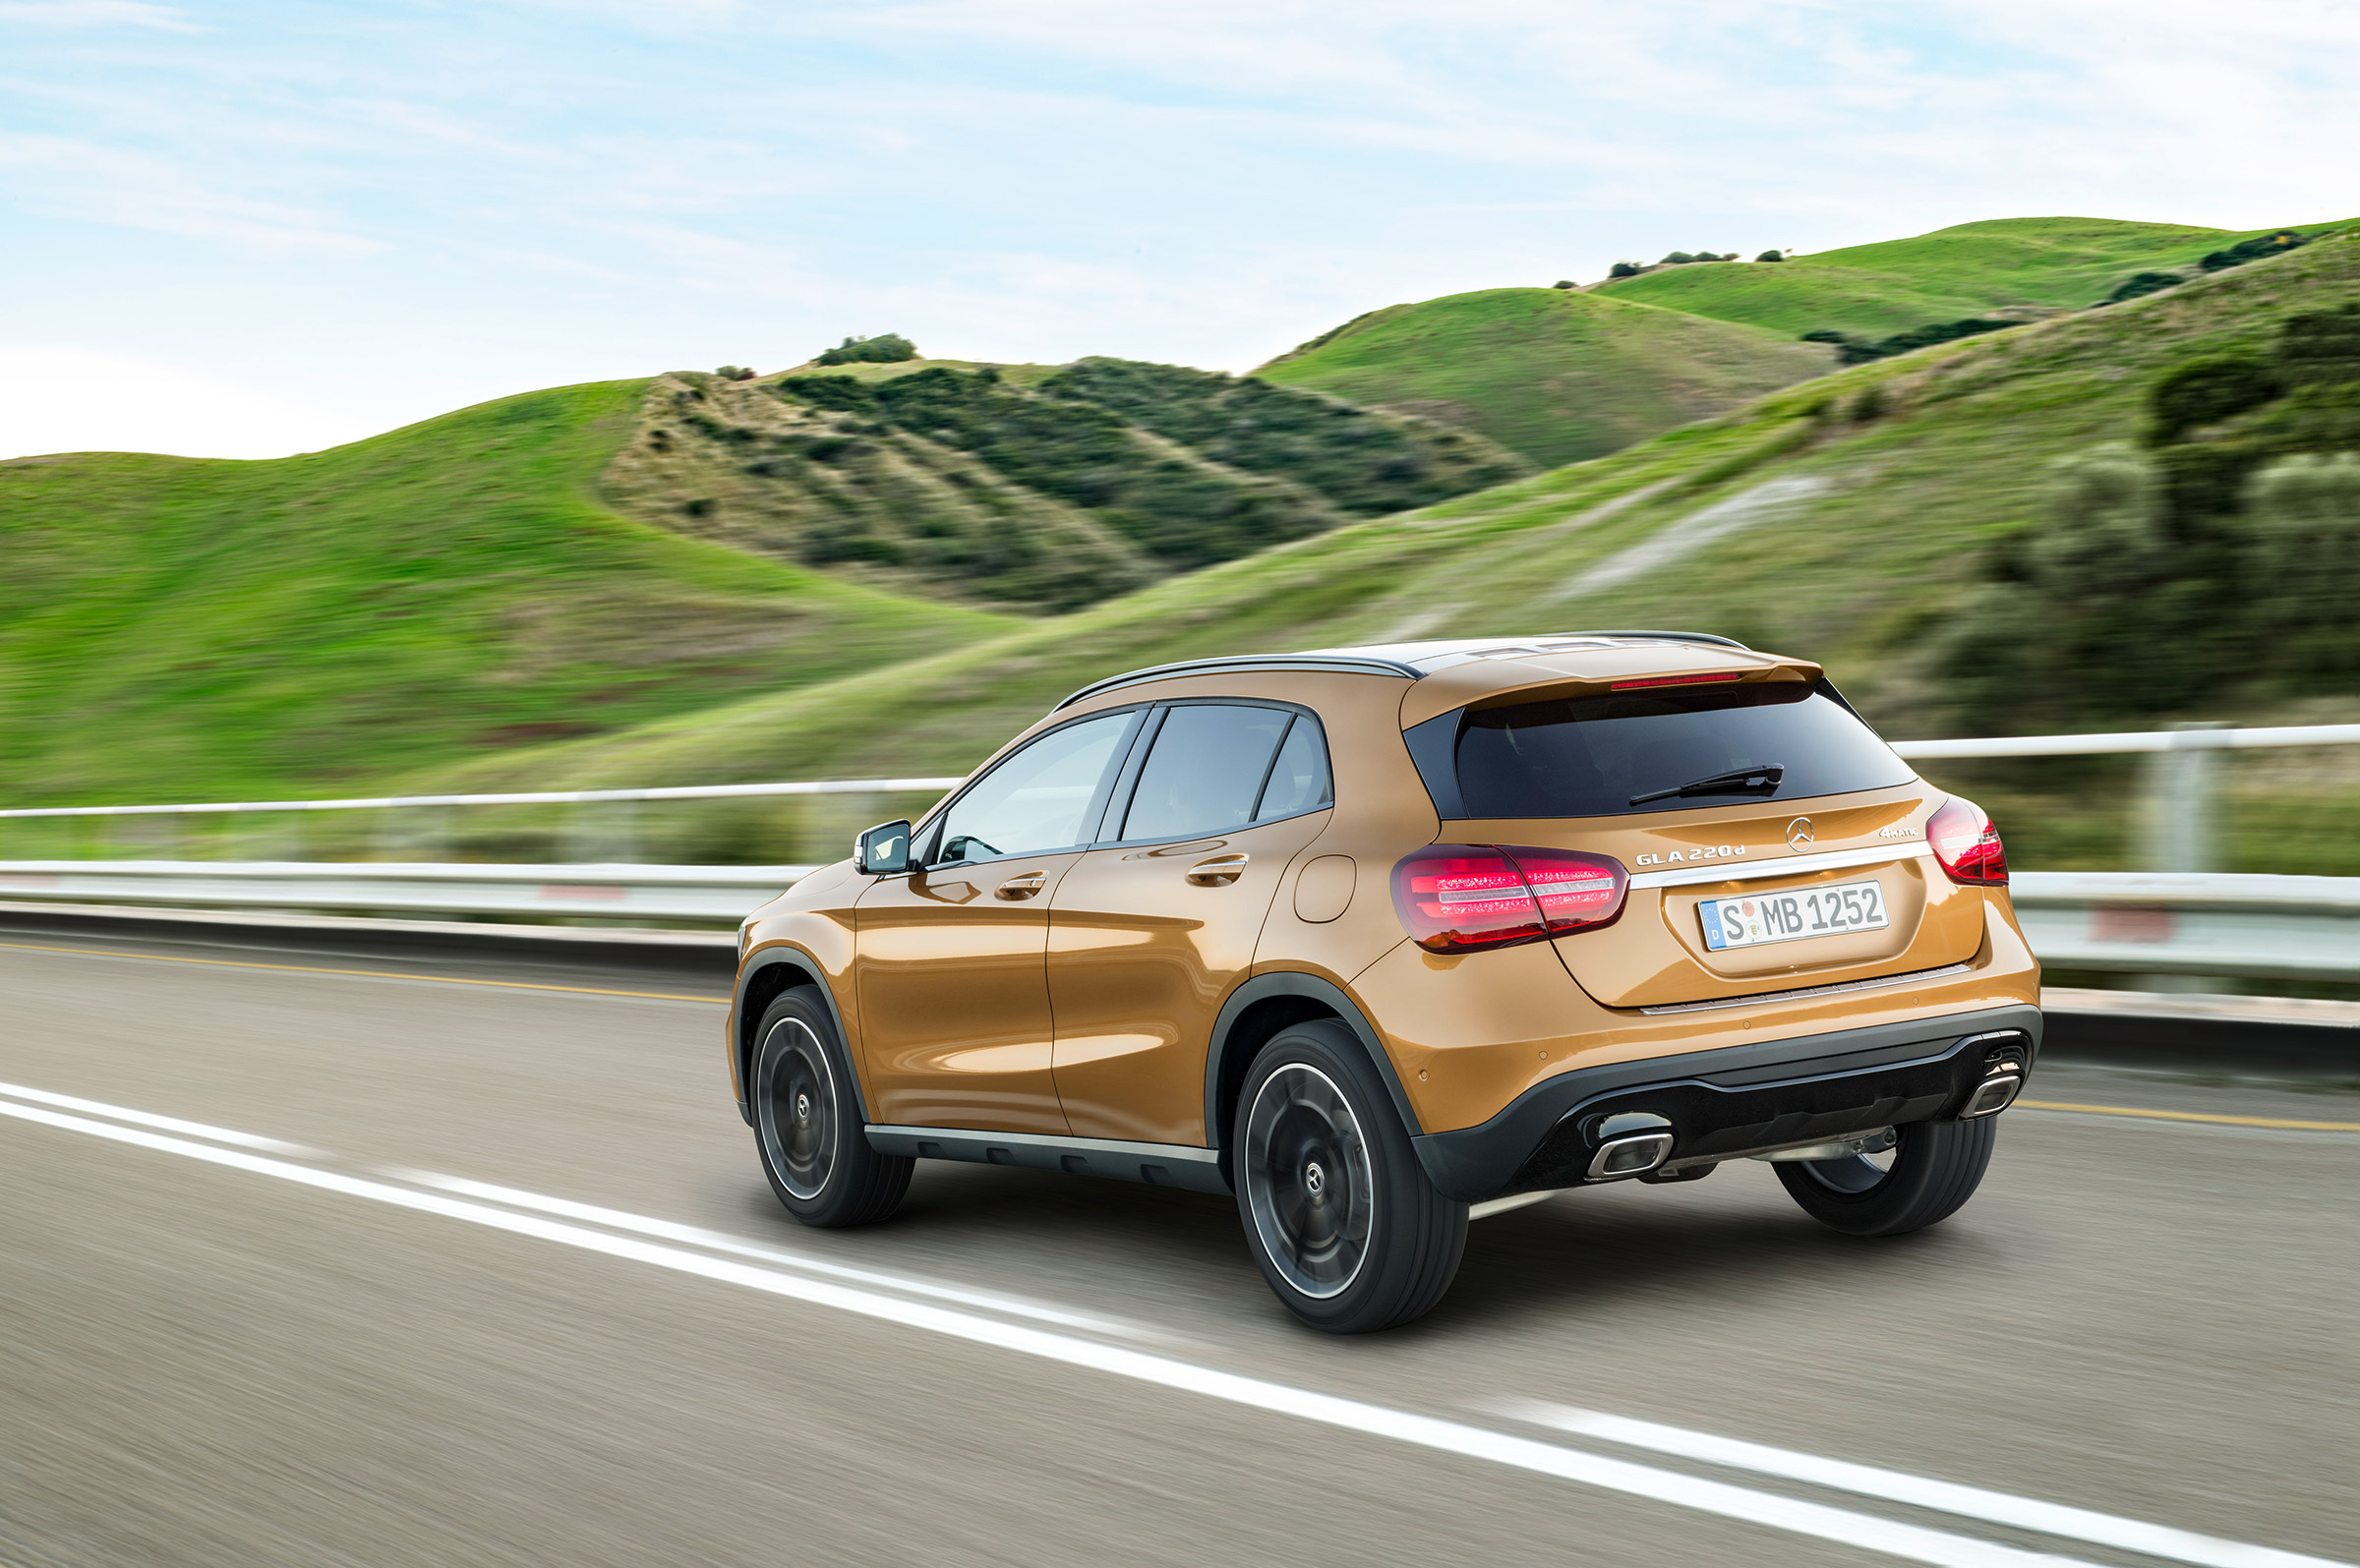 Mercedes Benz Gla Review Performance Specs And 0 60 Time